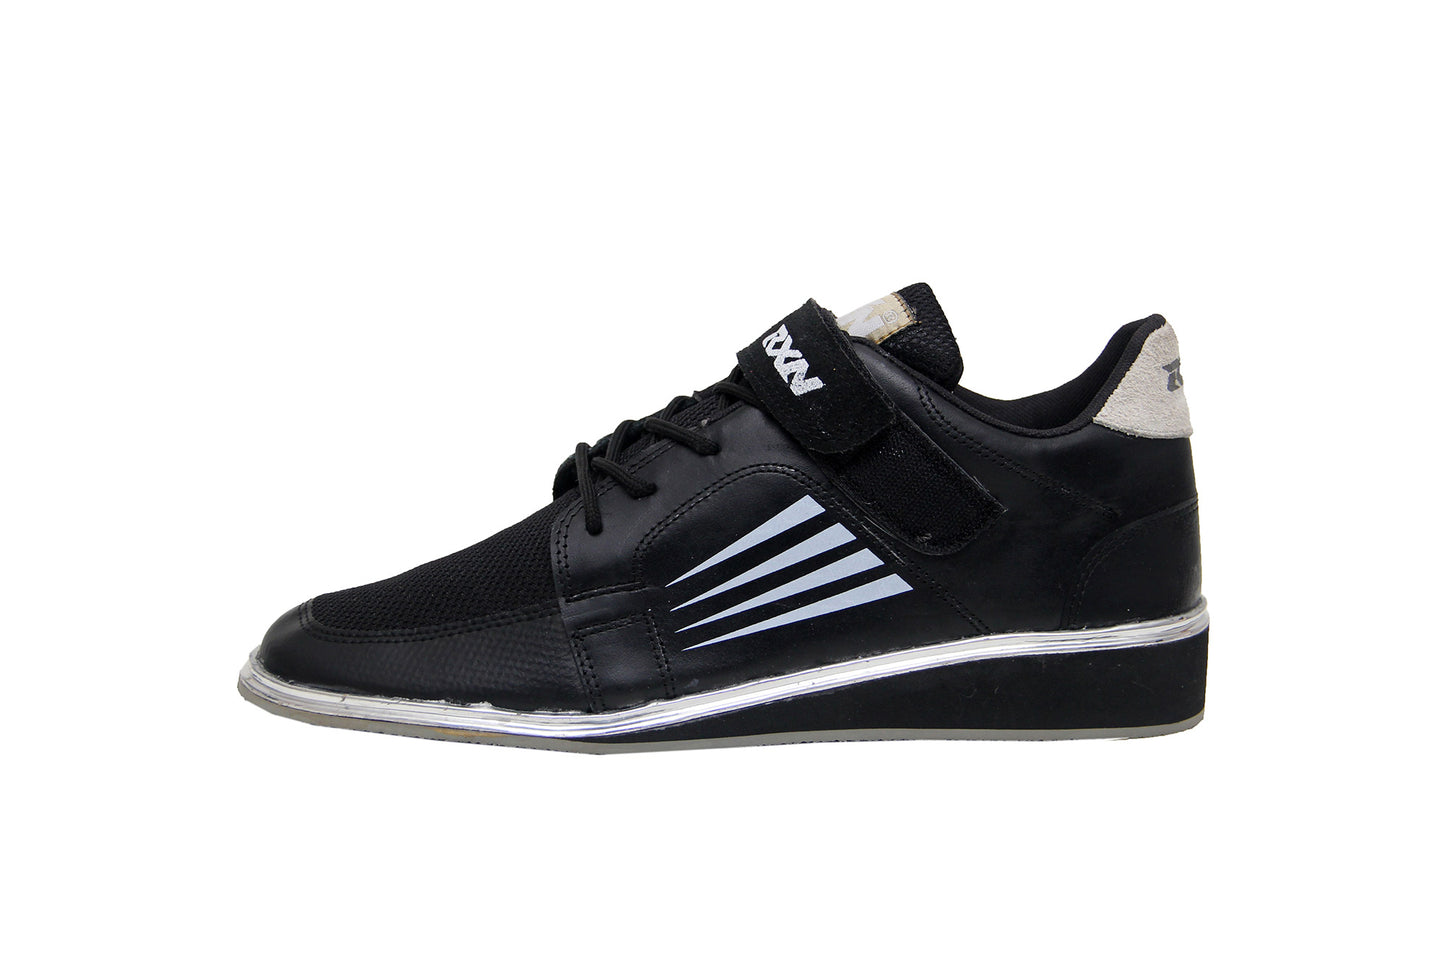 RXN WLS3 Black Weightlifting Shoe